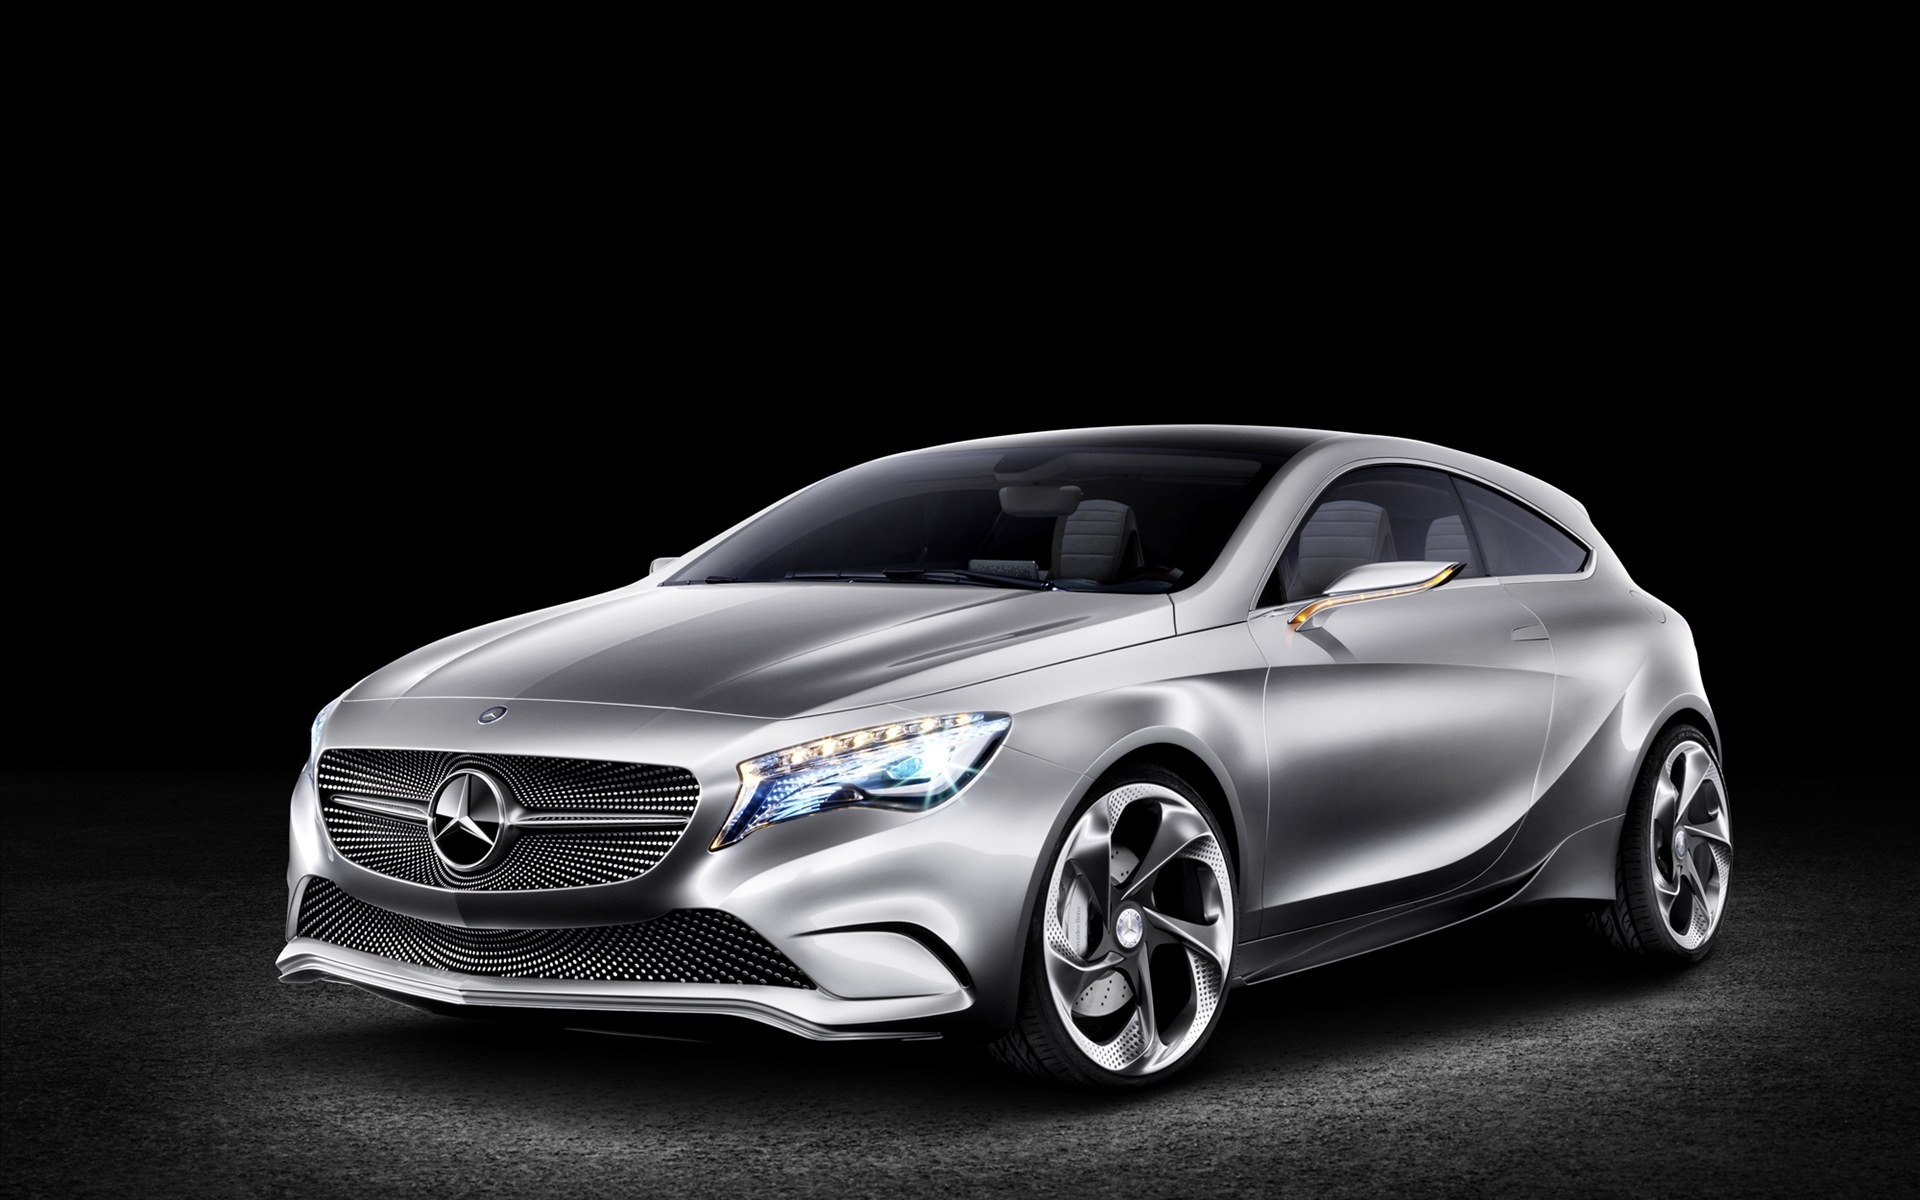 Special edition of concept cars wallpaper (25) #9 - 1920x1200